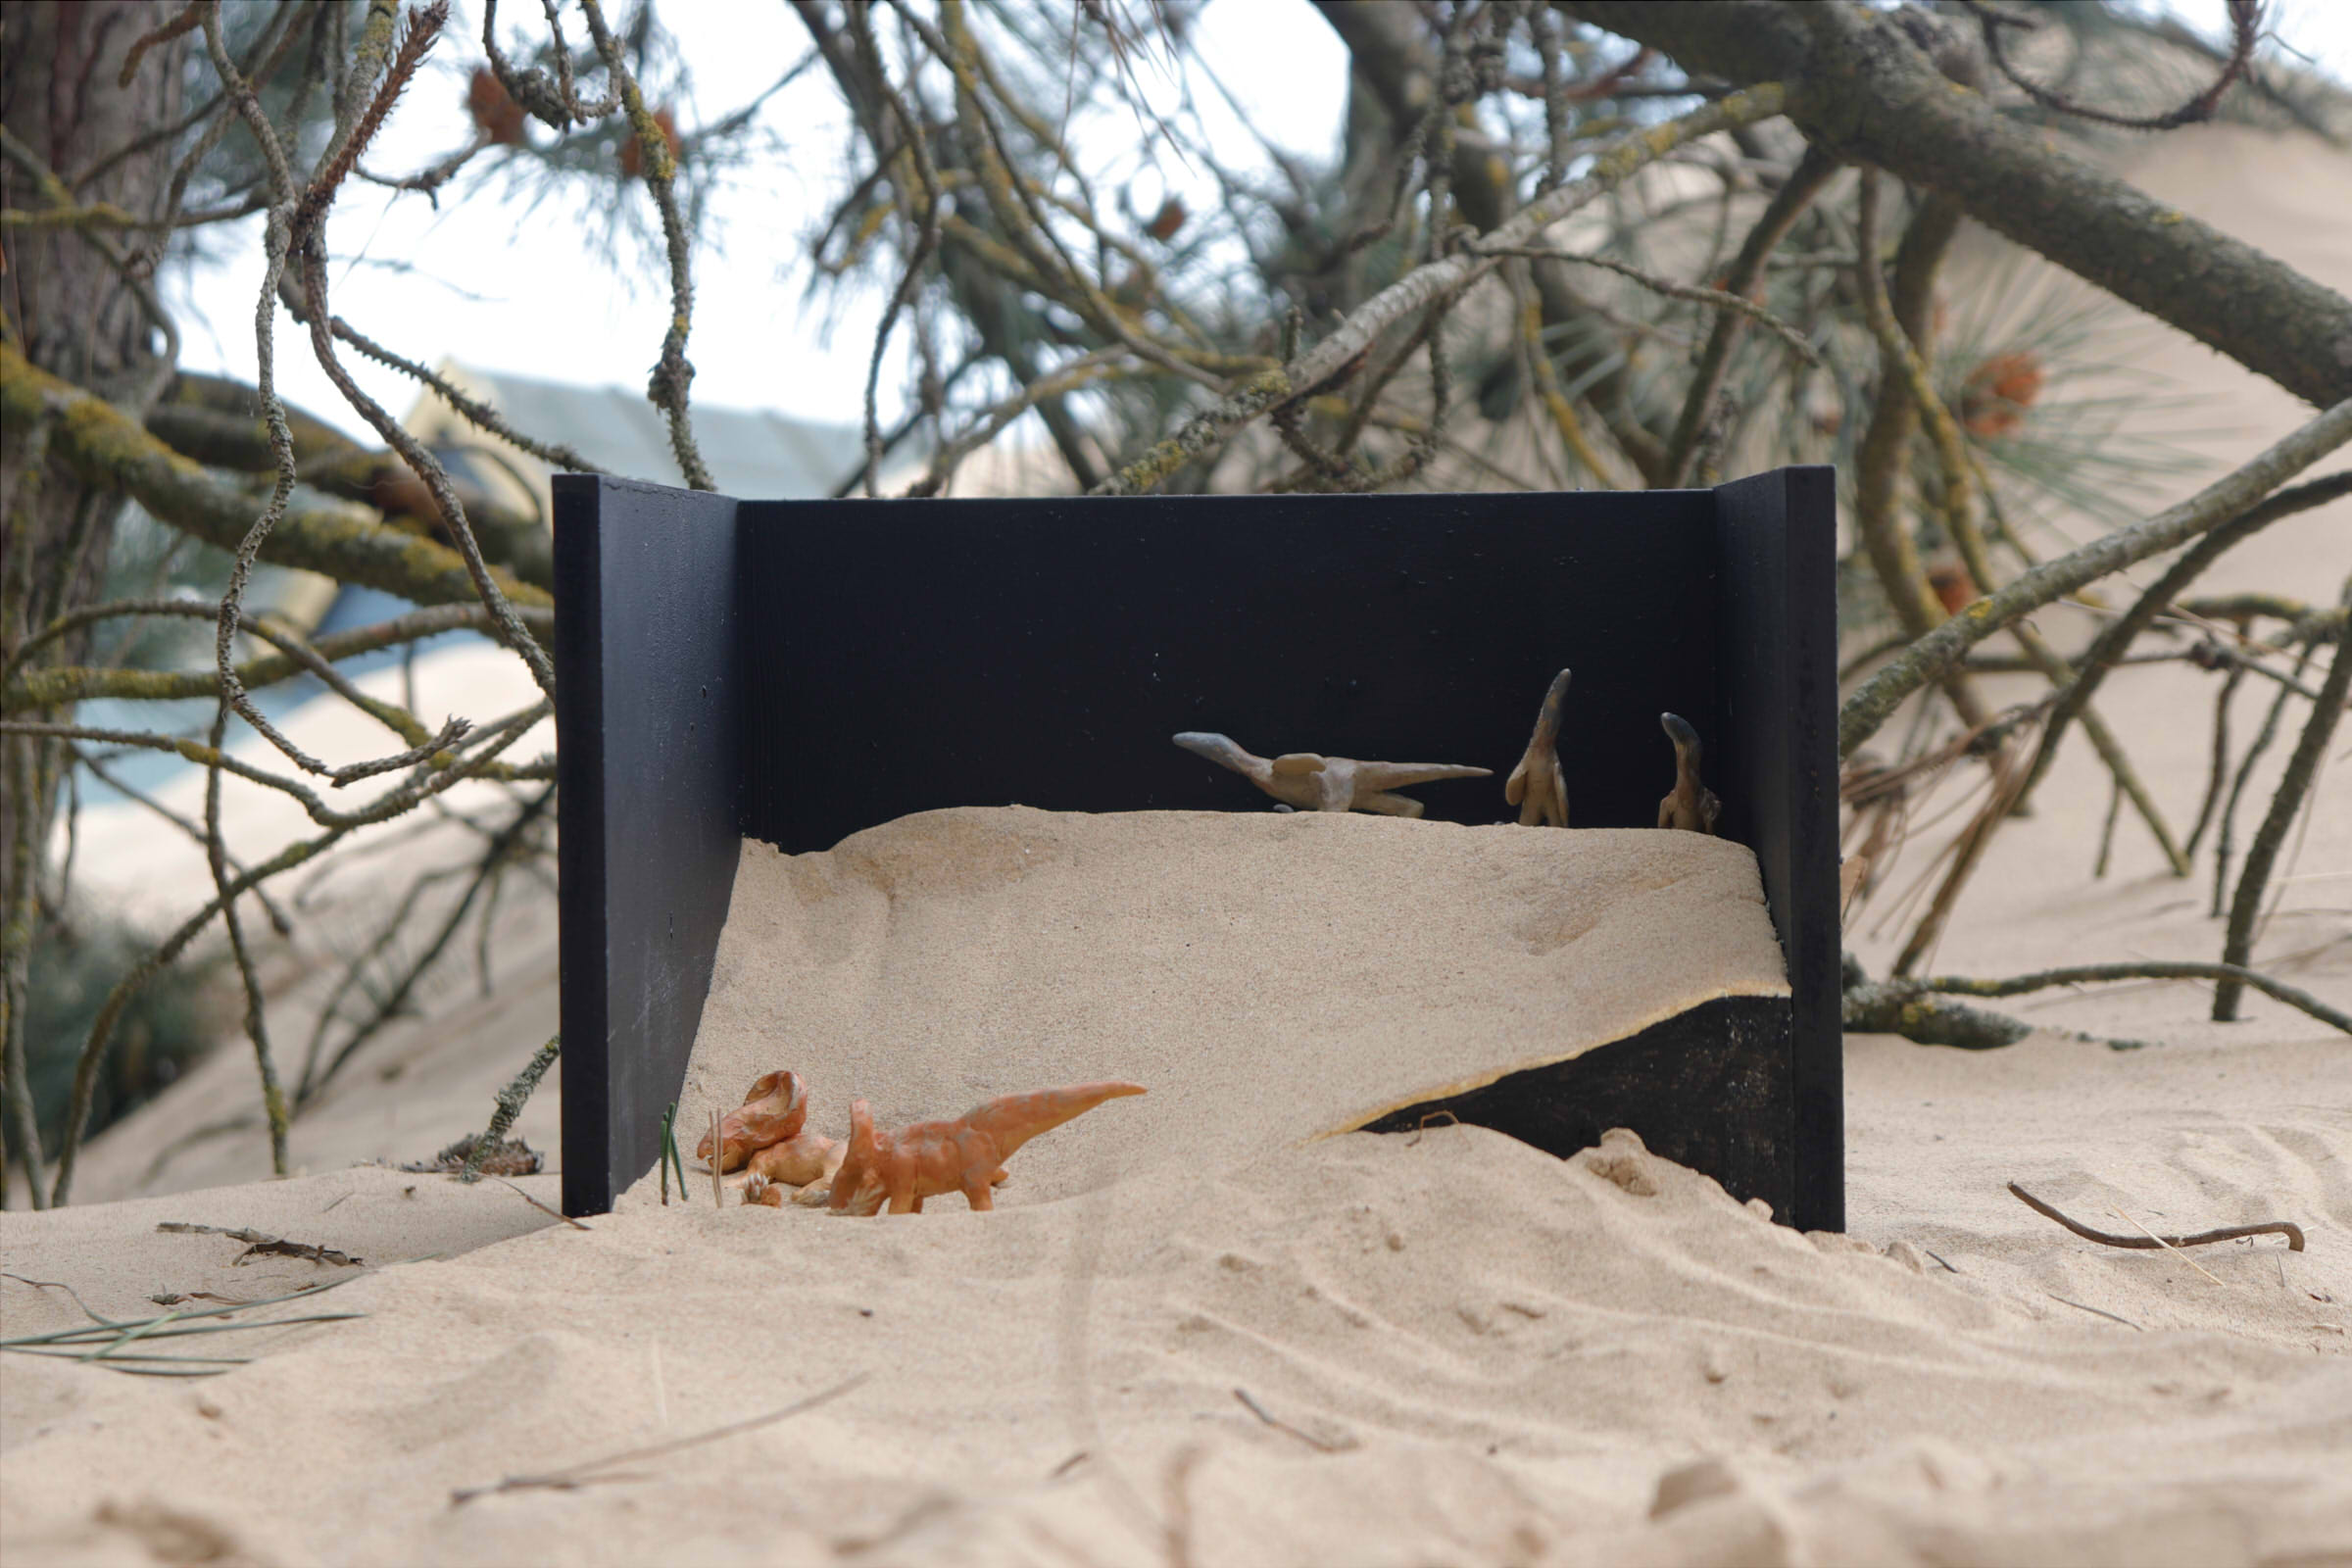 BA Animation work by Frankie Fry of his showcase project 'Dune'. Explores diorama fabrication and prehistoric life.